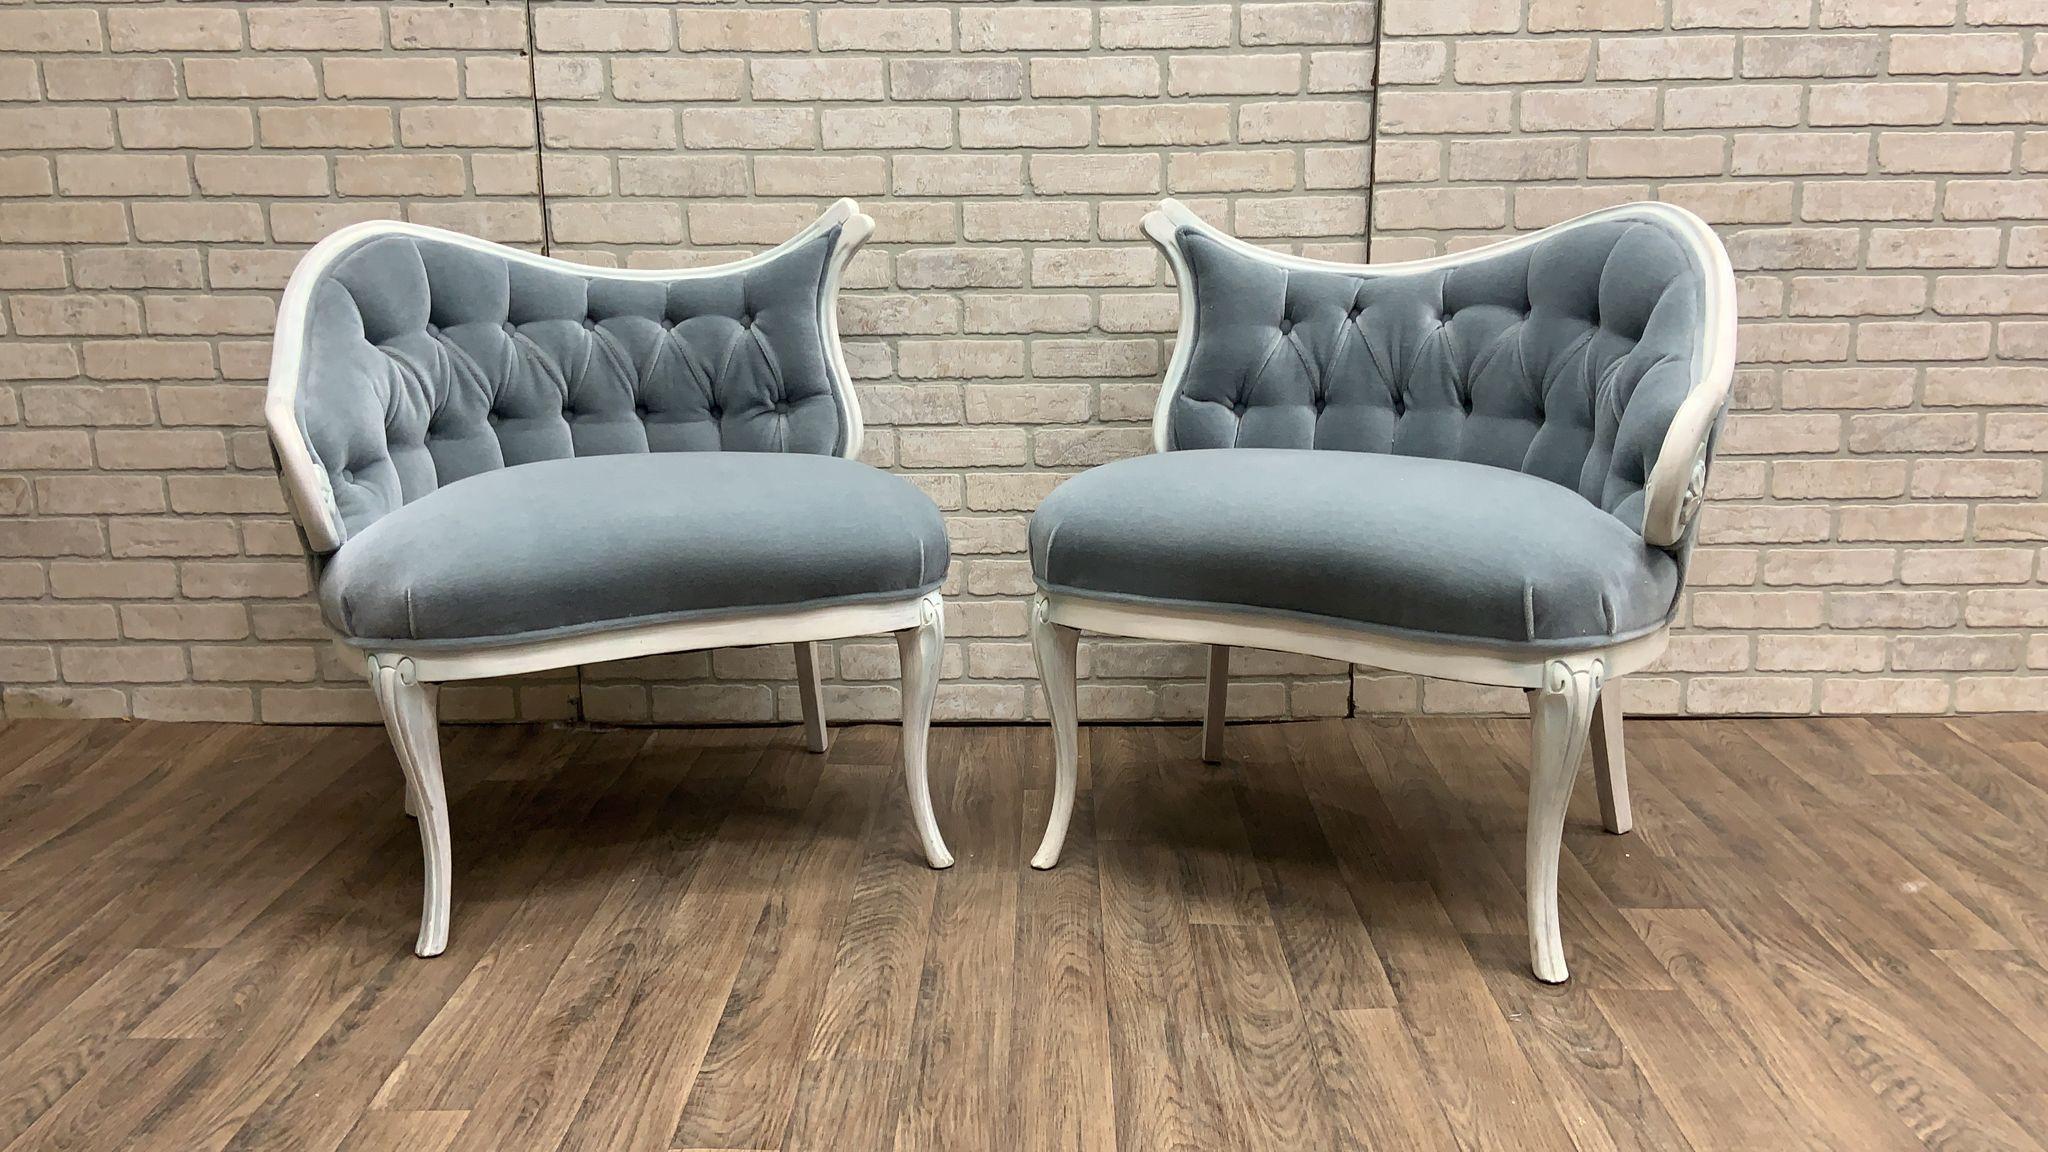 Vintage French Rococo Style Asymmetrical Fireside Chairs Newly Upholstered in Ice Blue Mohair - Pair

The 1940 vintage pair of French Rococo style asymmetrical fireside chairs exude elegance with their classic design. These chairs showcasing the